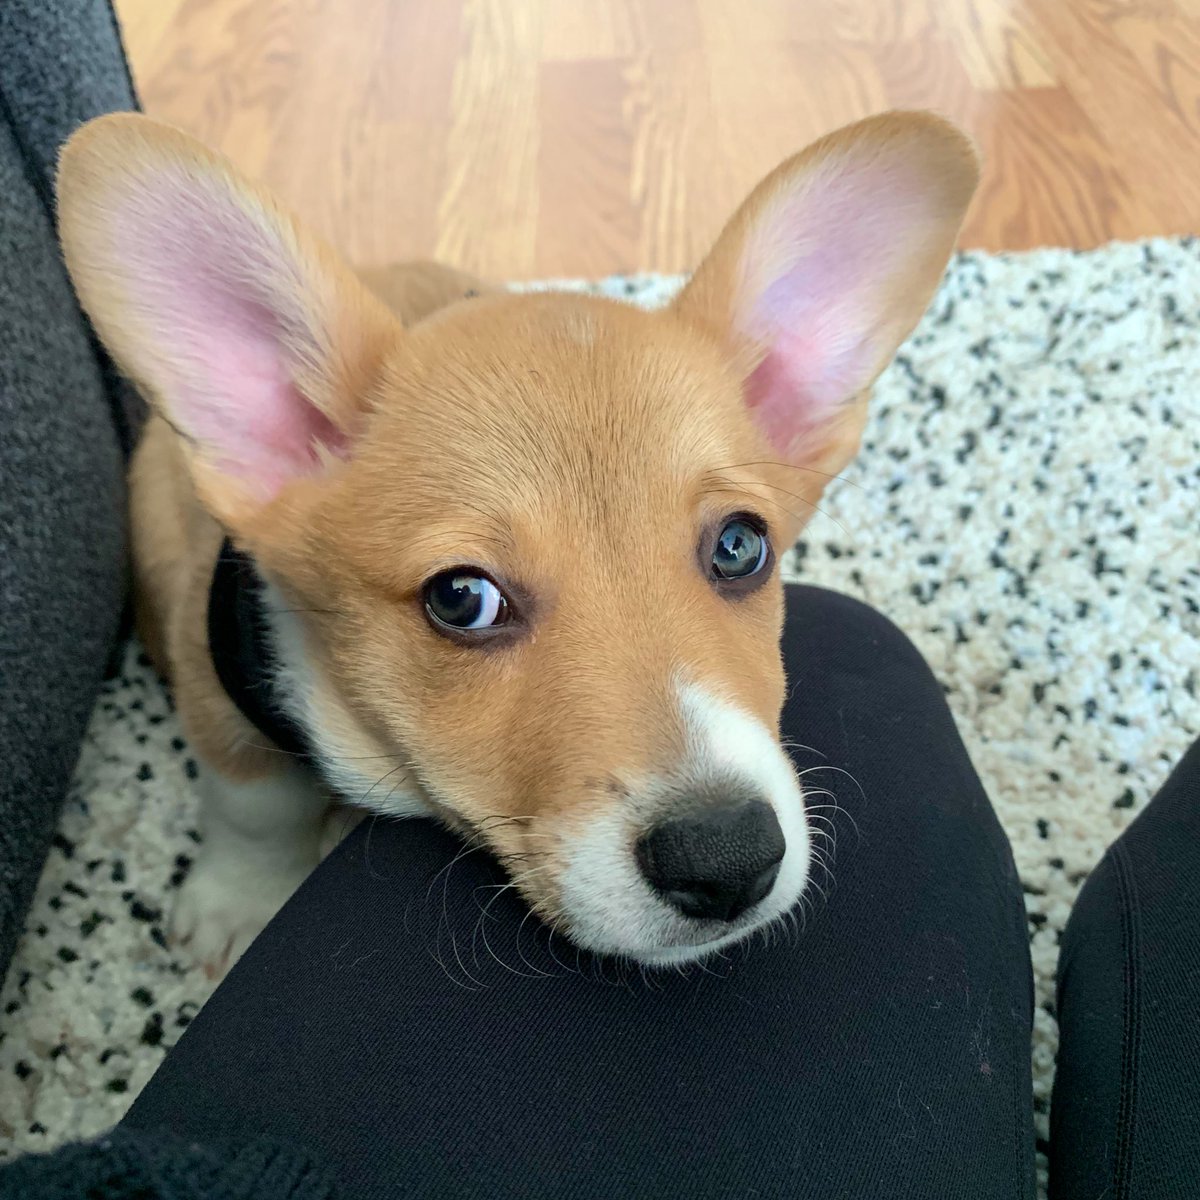 He’s awake! And his ears are vertical!